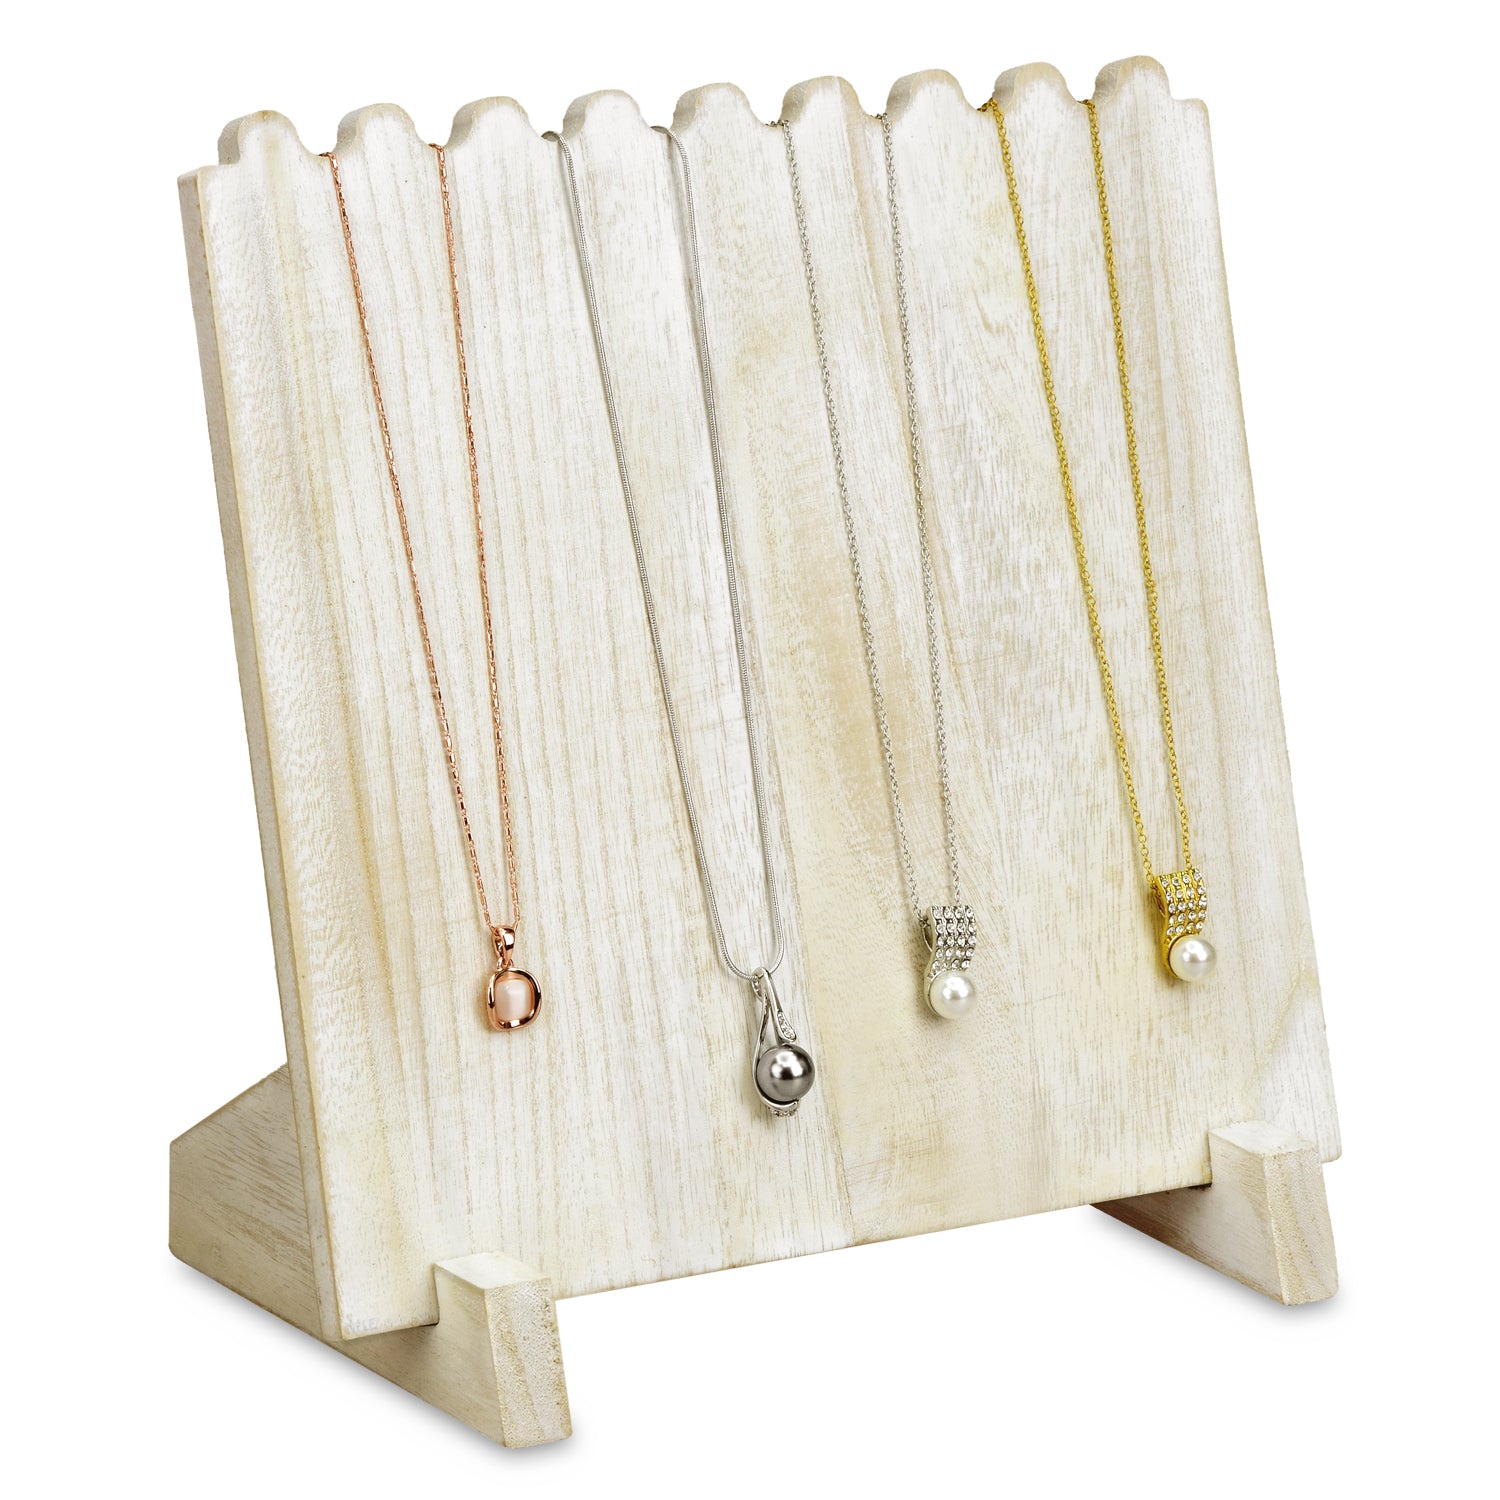 Wooden Earring Display Stand - Portable Wooden Earring Display